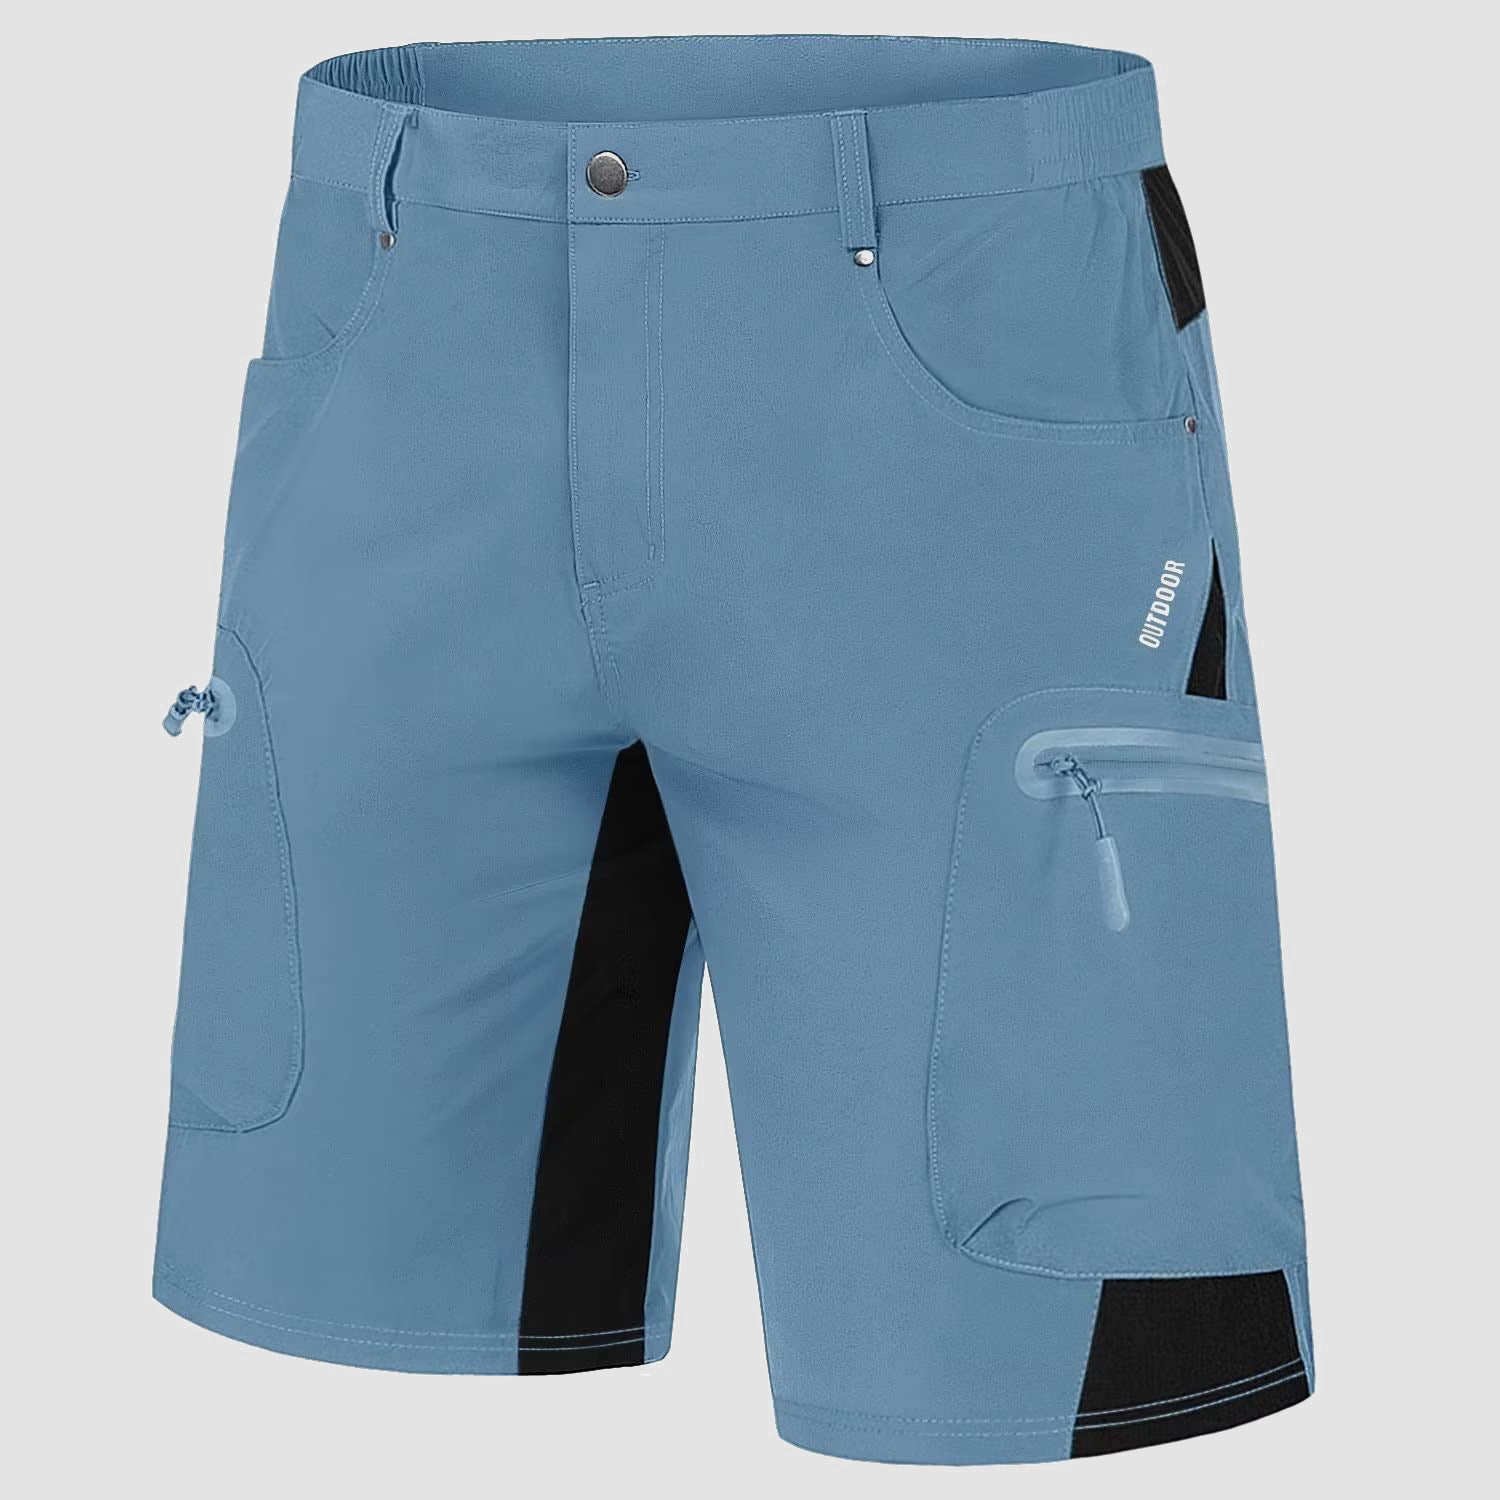 【Buy 4 Get The 4th Free】Men's Quick Dry Cargo Shorts, Mint / 38